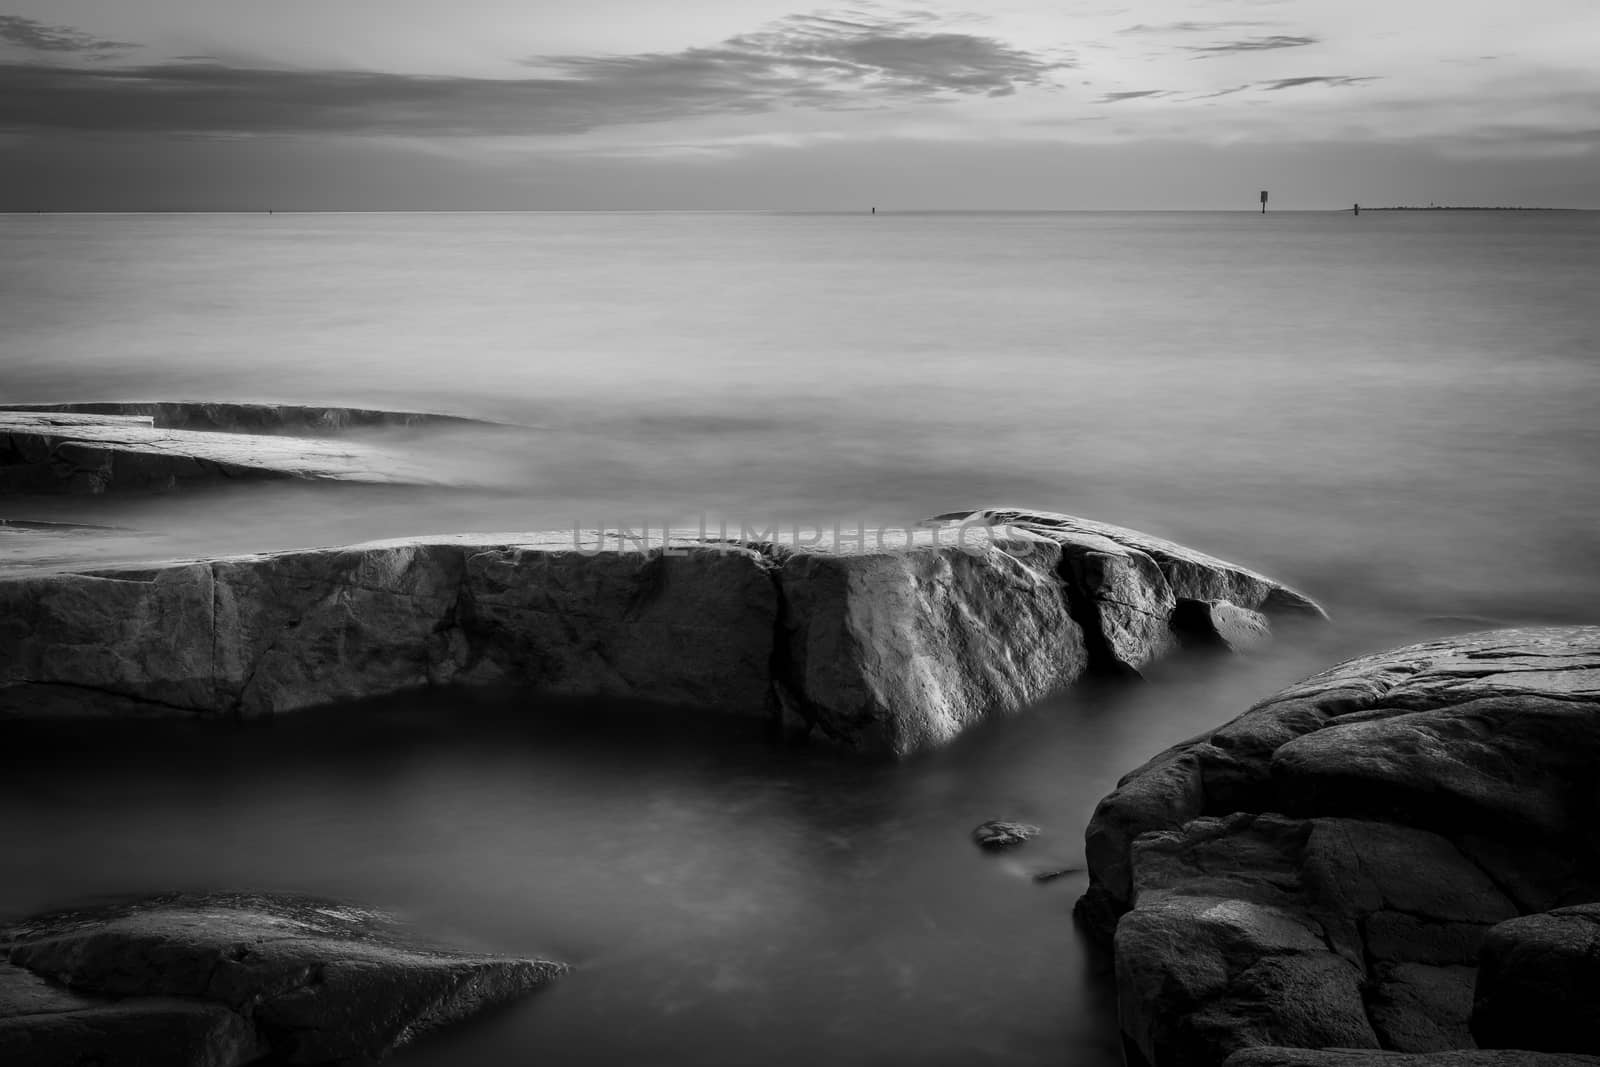 Peaceful seascape, taken in Pori, Finland. The picture is black and white.